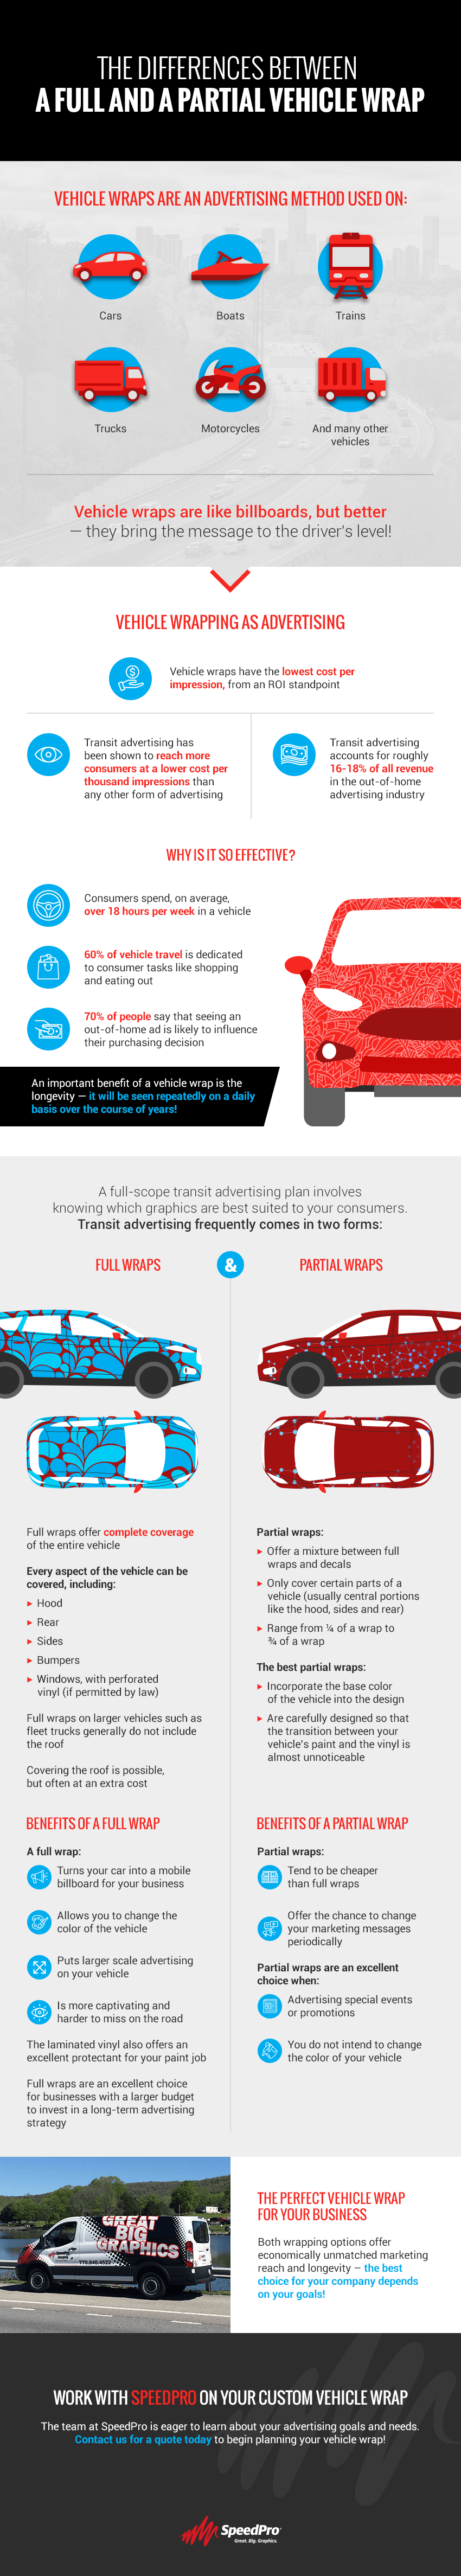 The Differences Between a Full and a Partial Vehicle Wrap [Infographic]